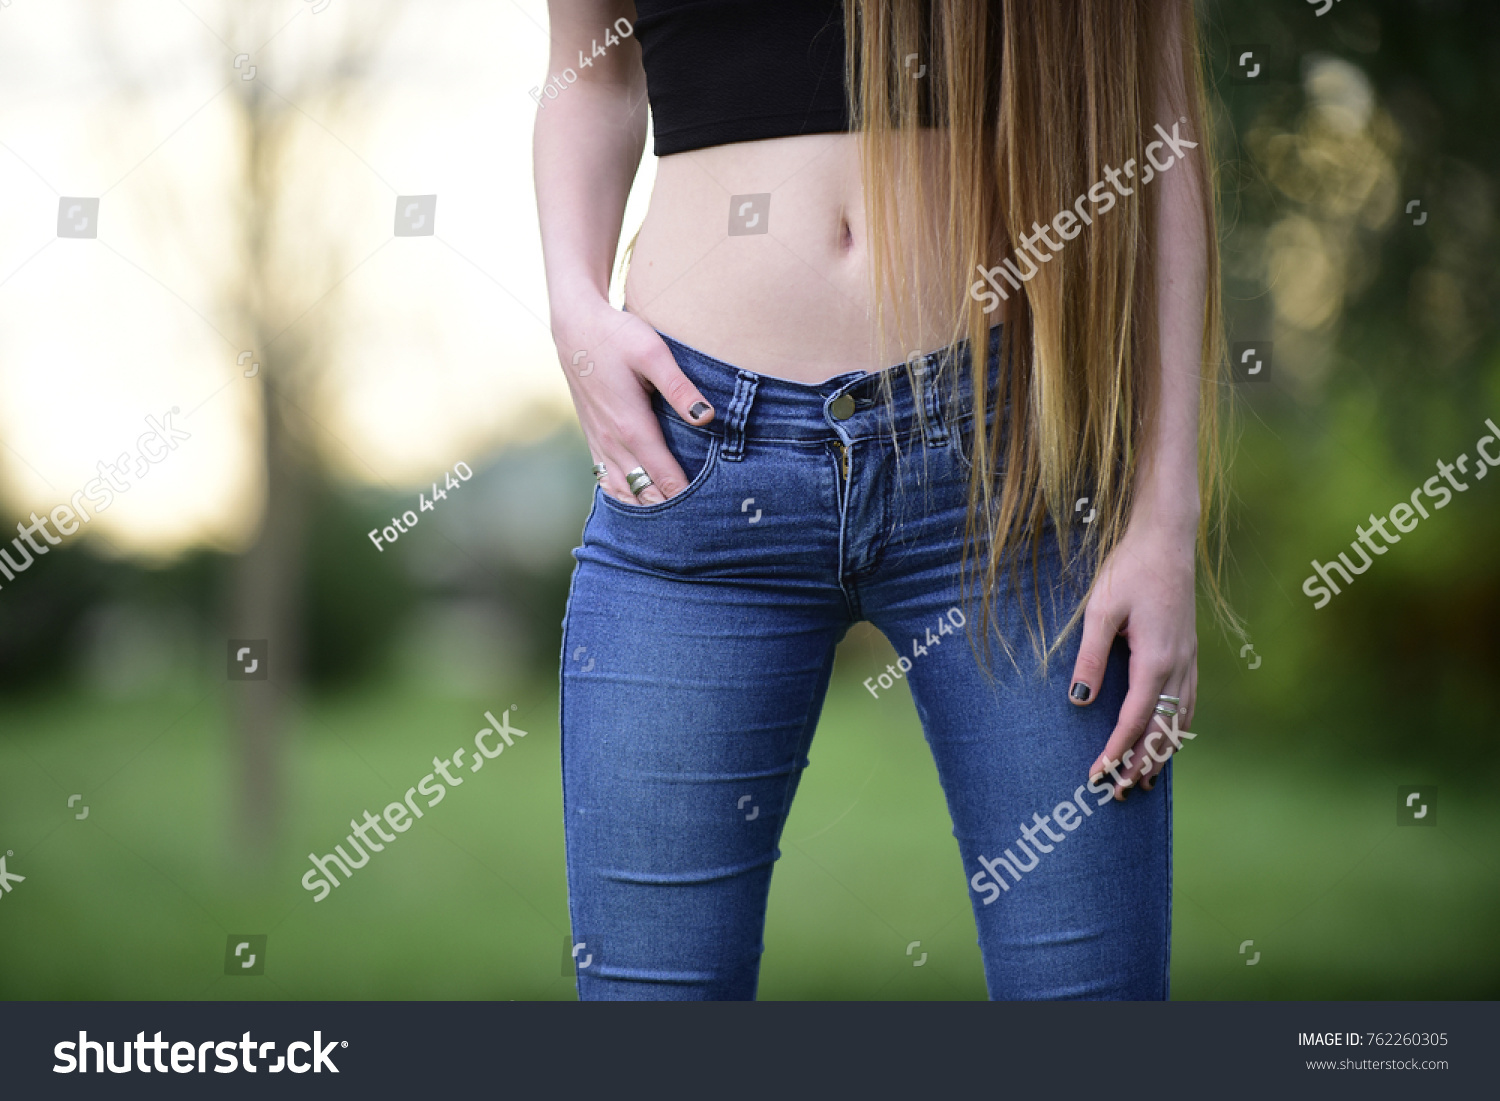 Blonde In Jeans